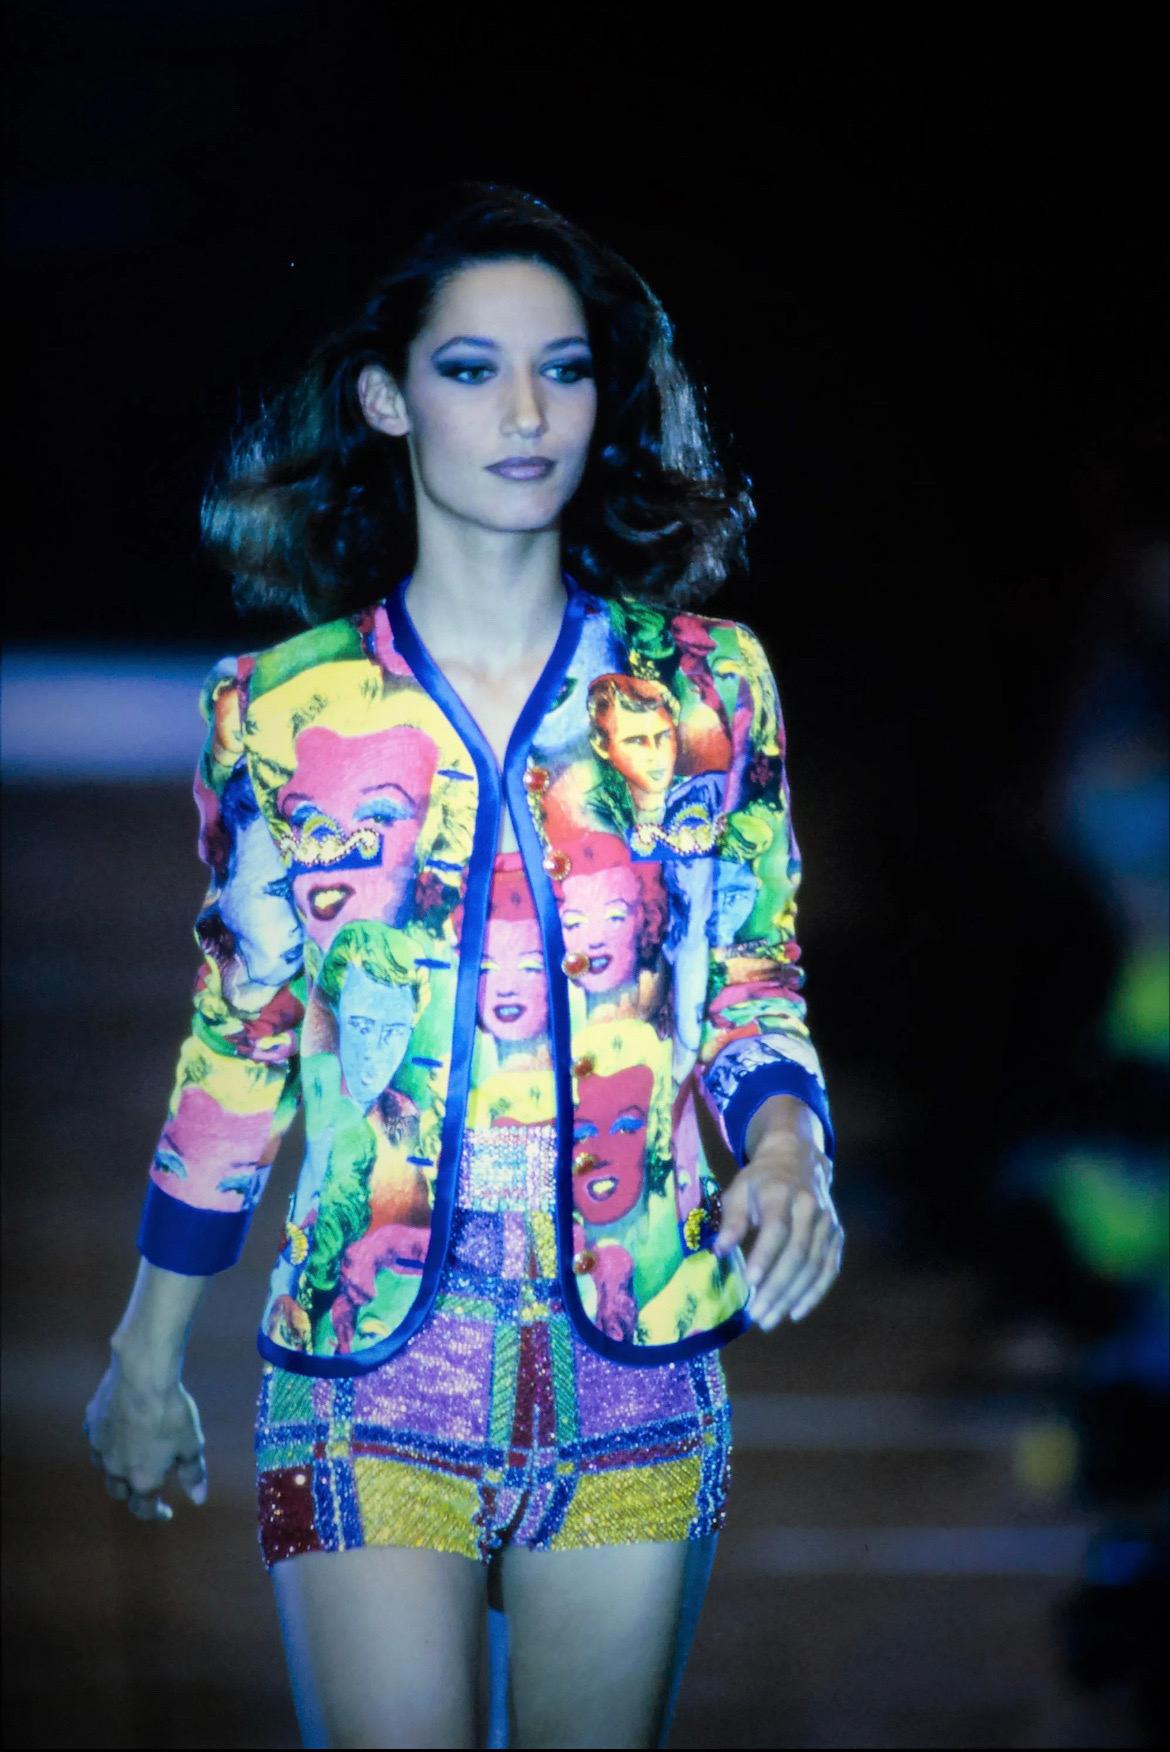 Gianni Versace Couture skirt suit in excellent condition from Spring Summer 1991 featuring an Andy Warhol inspired pop art motif of pop culture icons Marilyn Monroe and James Dean. 
As seen on the Spring Summer 1991 runway on model Marpessa Hennink